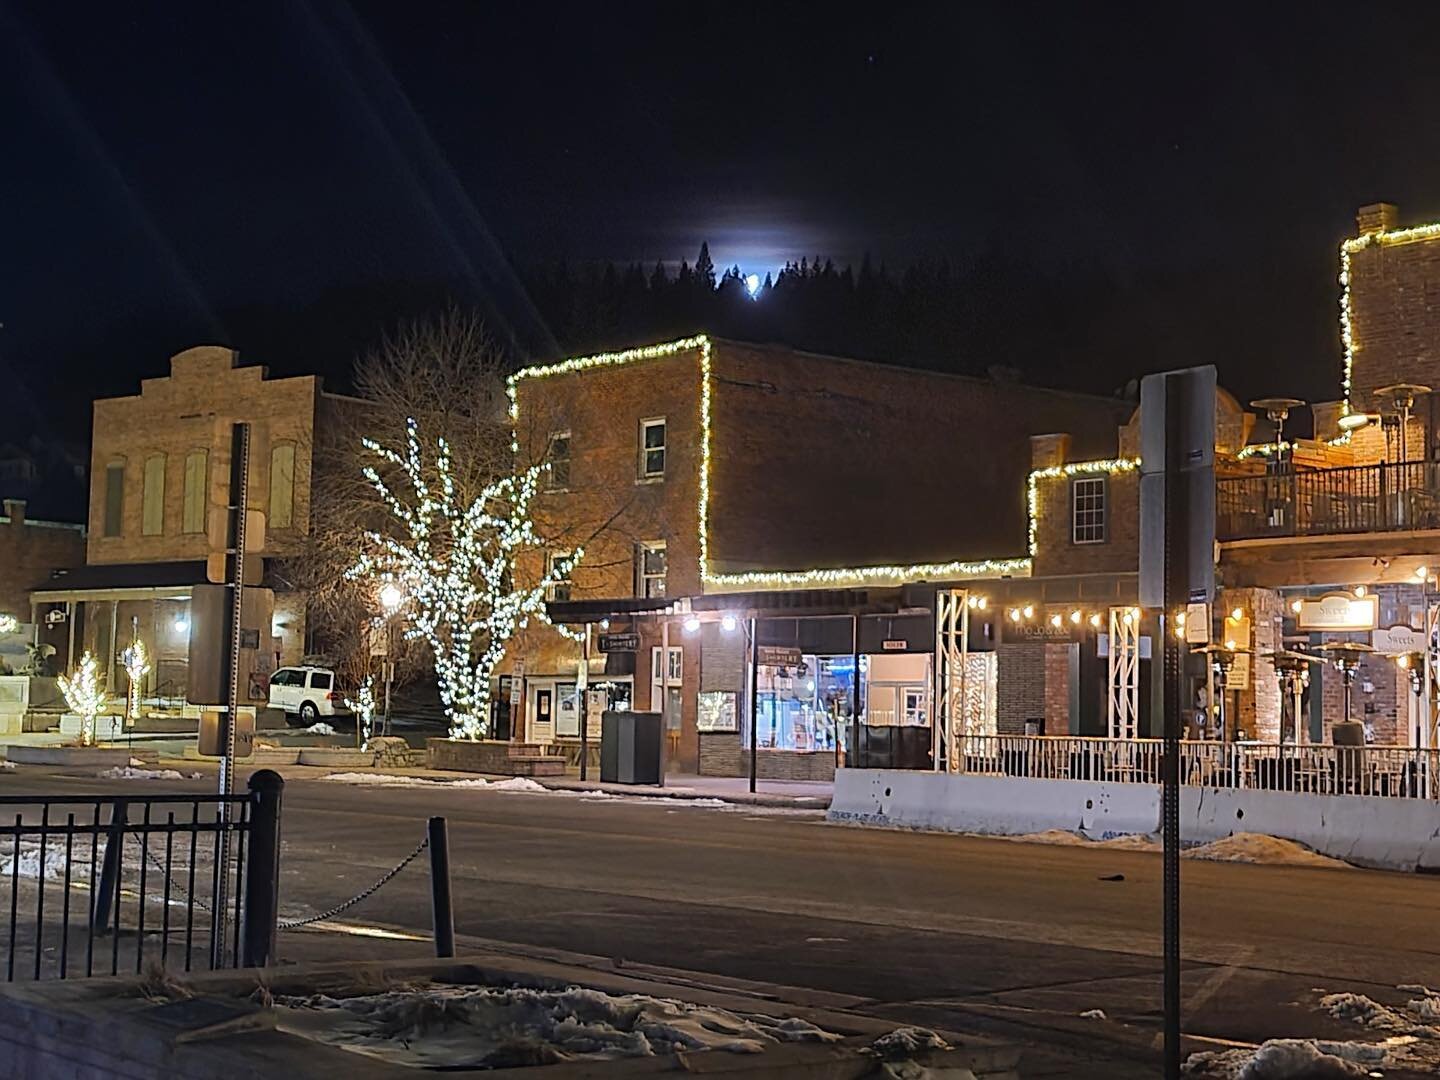 Goodnight Downtown Truckee

Thanks for the photo: @weedmanonwheels420